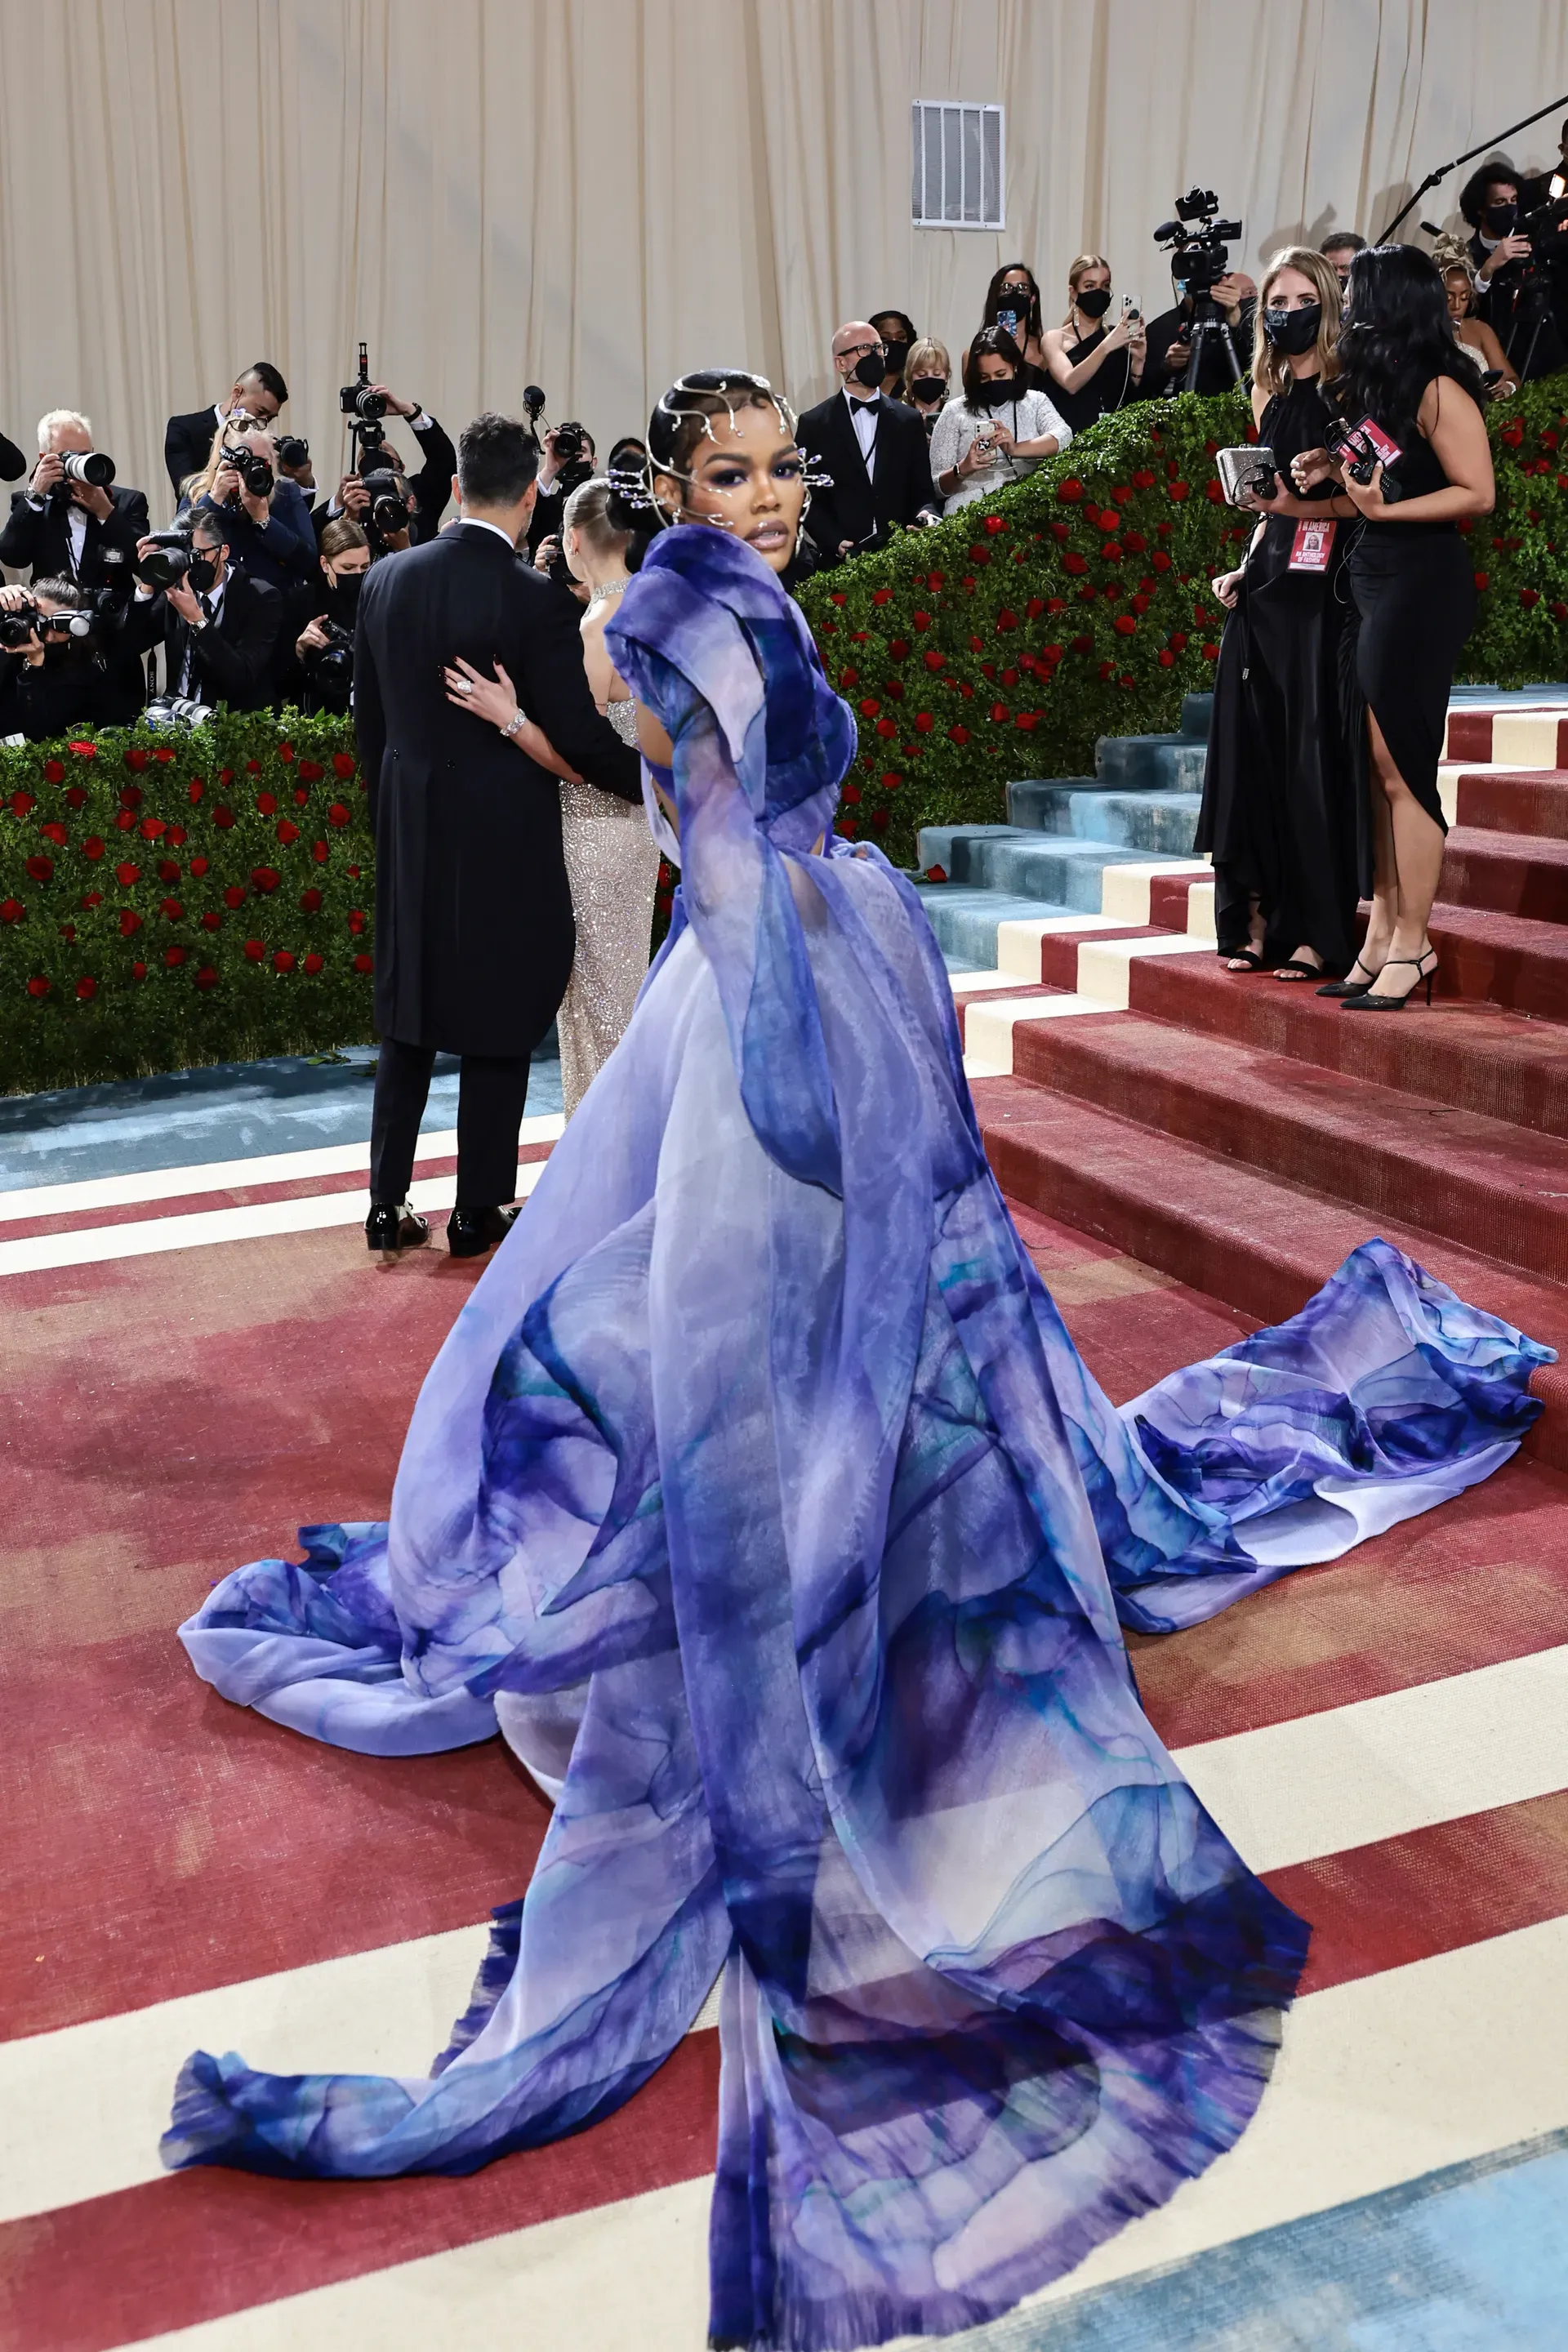 2022 Met Gala Fashion Searches: Corsets, Sequined Dresses Increase